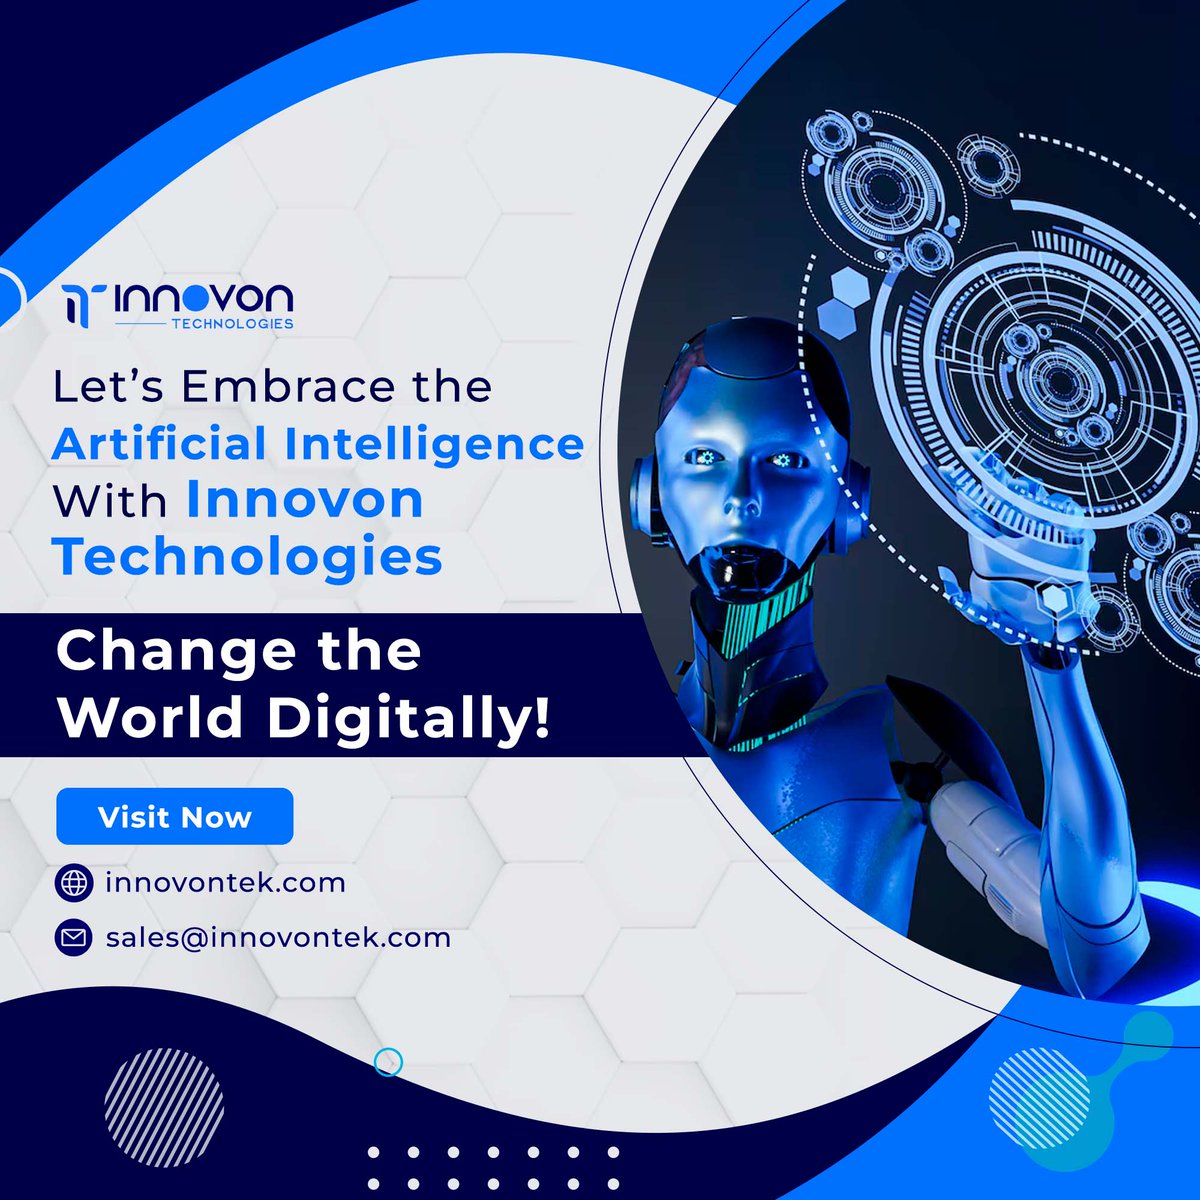 Explore our range of IT solutions and take your business to new heights today!
innovontek.com

#innovon #innovontech #digitaltransformation #innovationpower #innovativesolution #digitalera #innovontechnologies #insurancetechnology #techininsuranc #guidewire #duckcreek